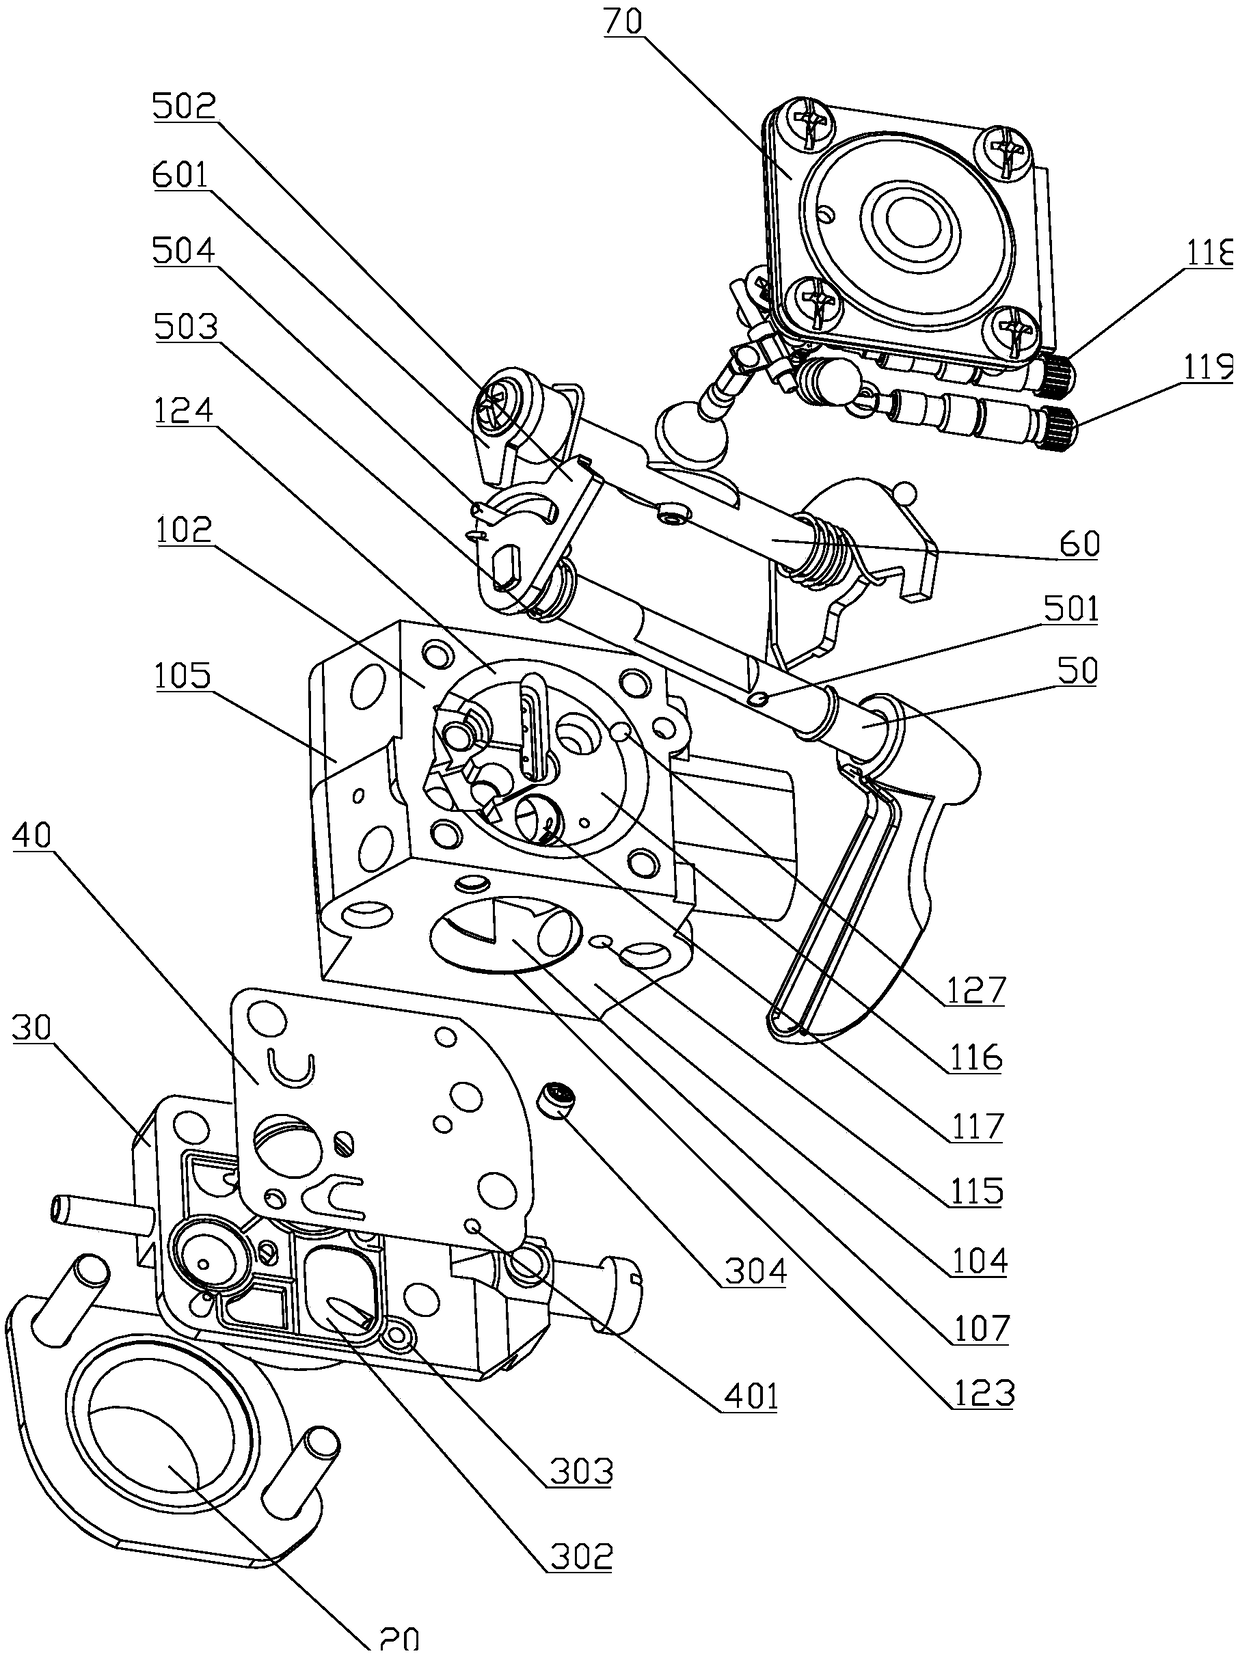 A carburetor with starting oil system